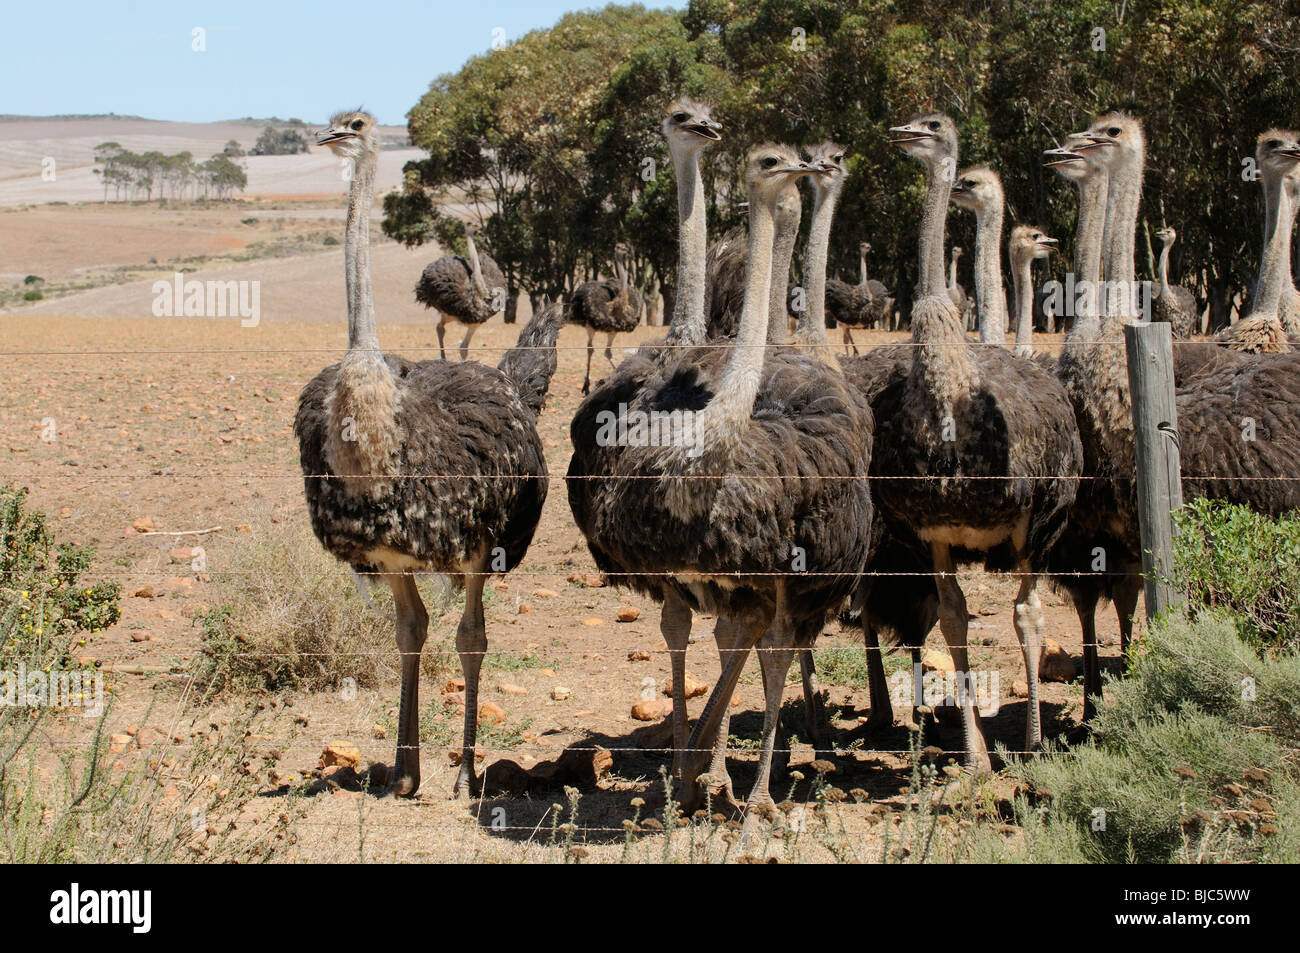 Ostrich farm in the western Cape South Africa Ostriches feed on fields that earlier in the year were used for growing wheat Stock Photo